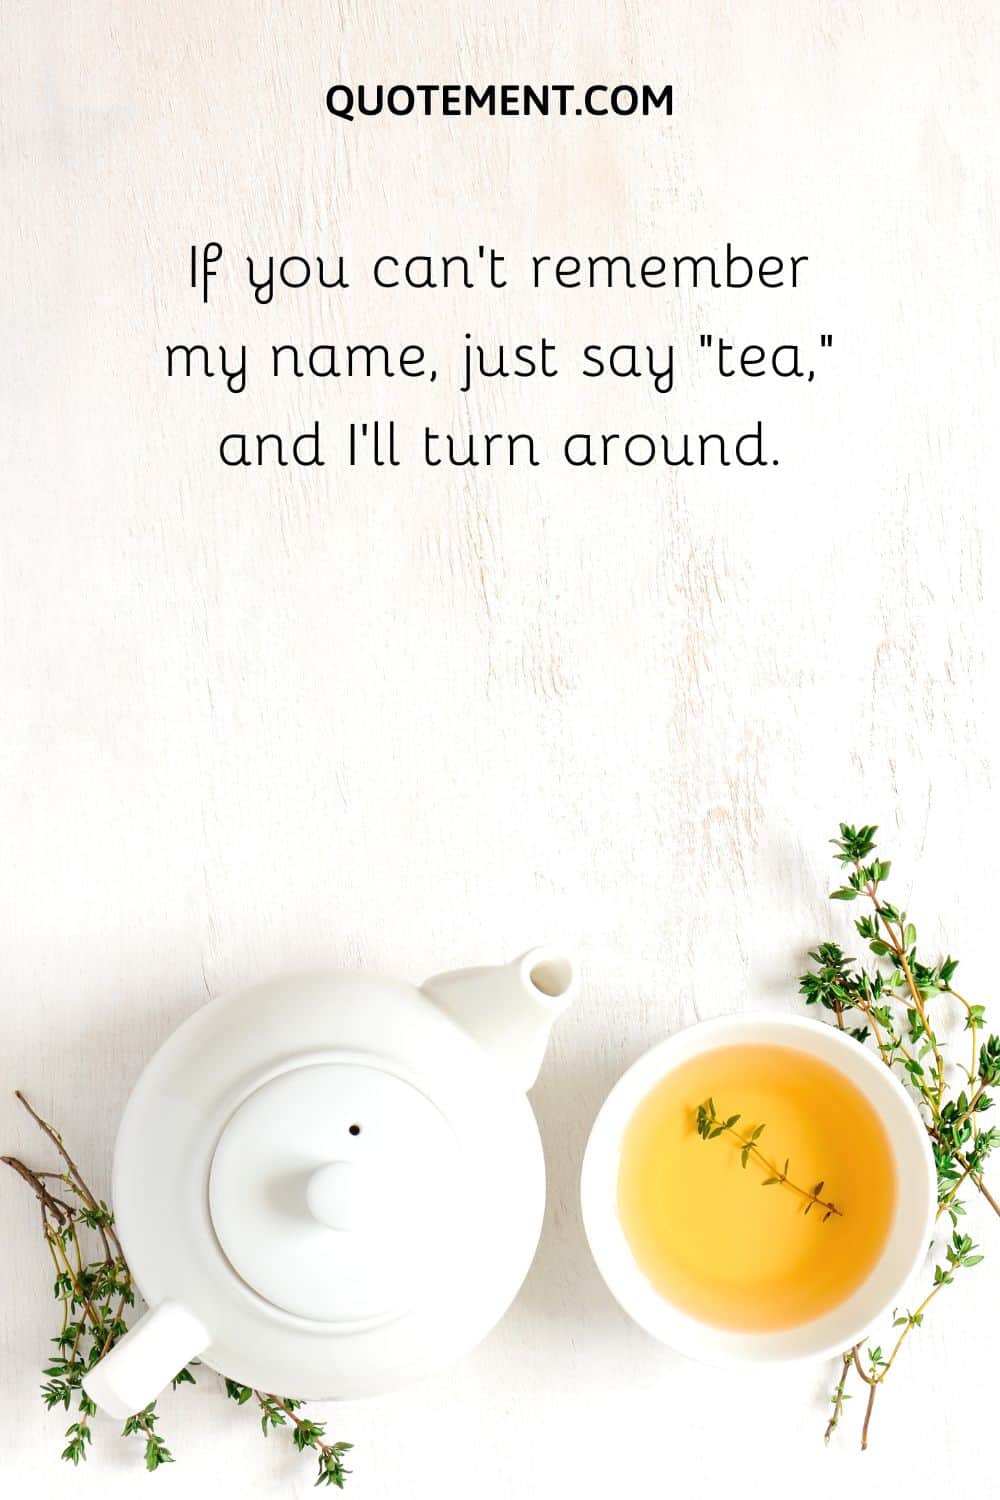 If you can’t remember my name, just say “tea,” and I’ll turn around.